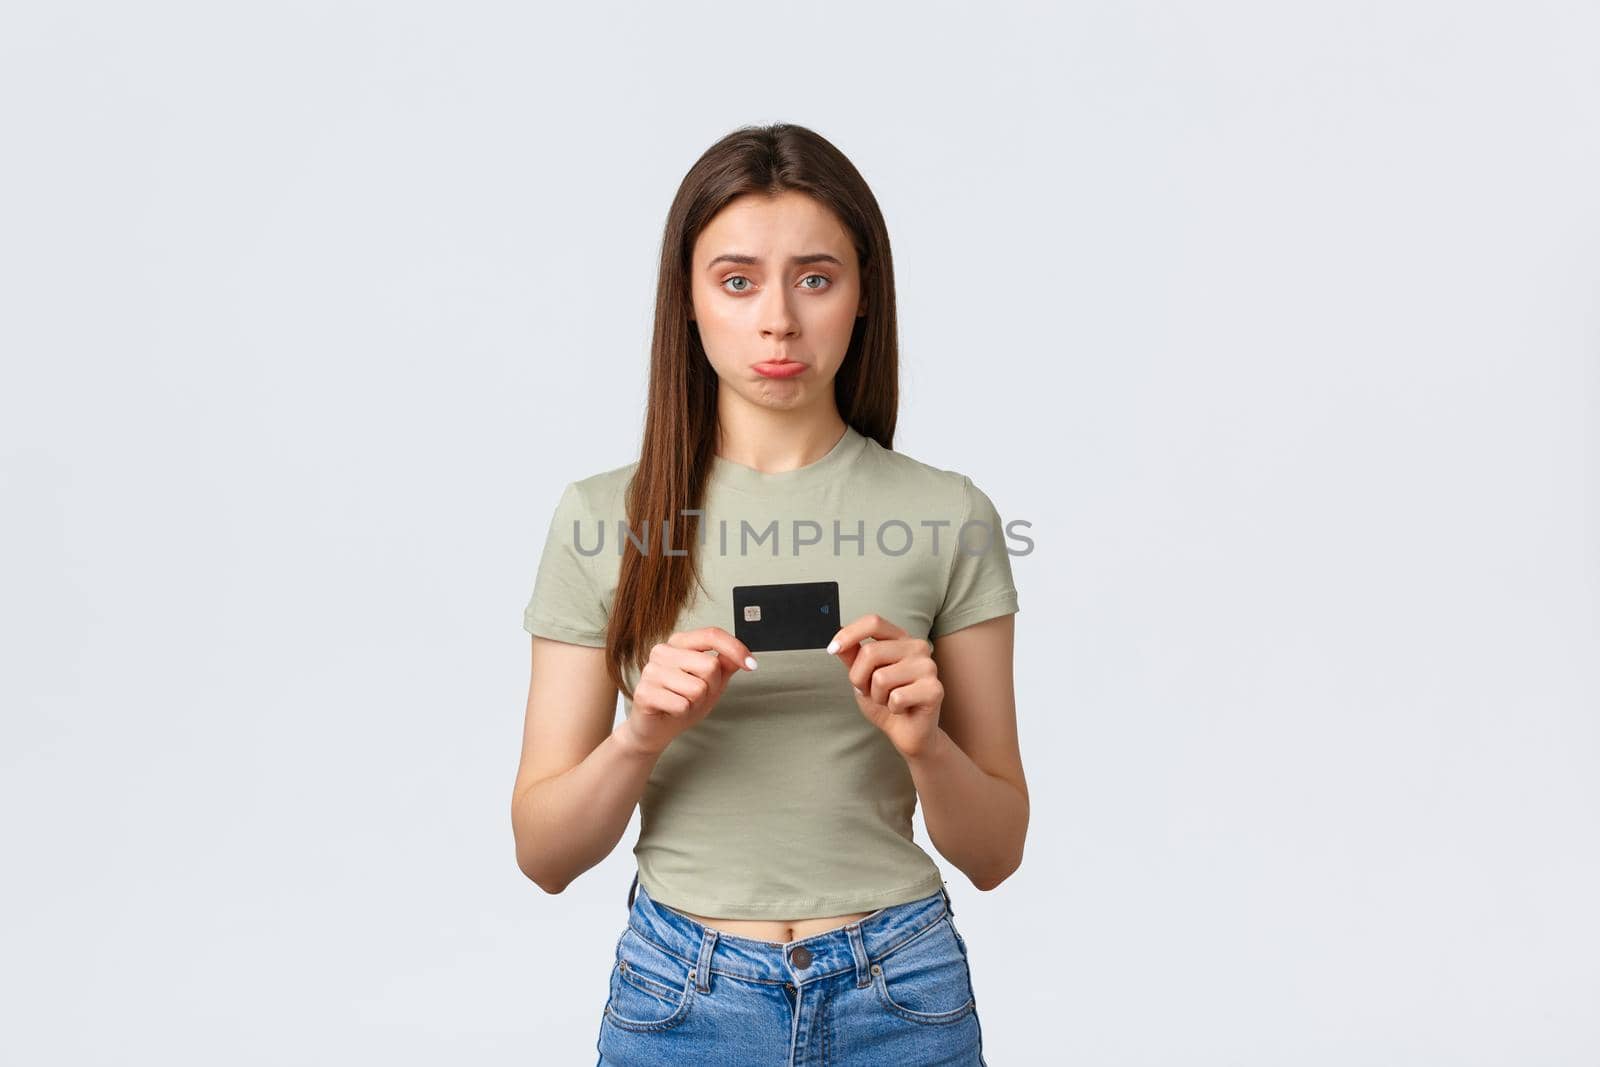 Shopping mall, lifestyle and fashion concept. Gloomy and disappointed pouting cute woman in casual outfit showing credit card without no money, wasted all cash on new clothes.